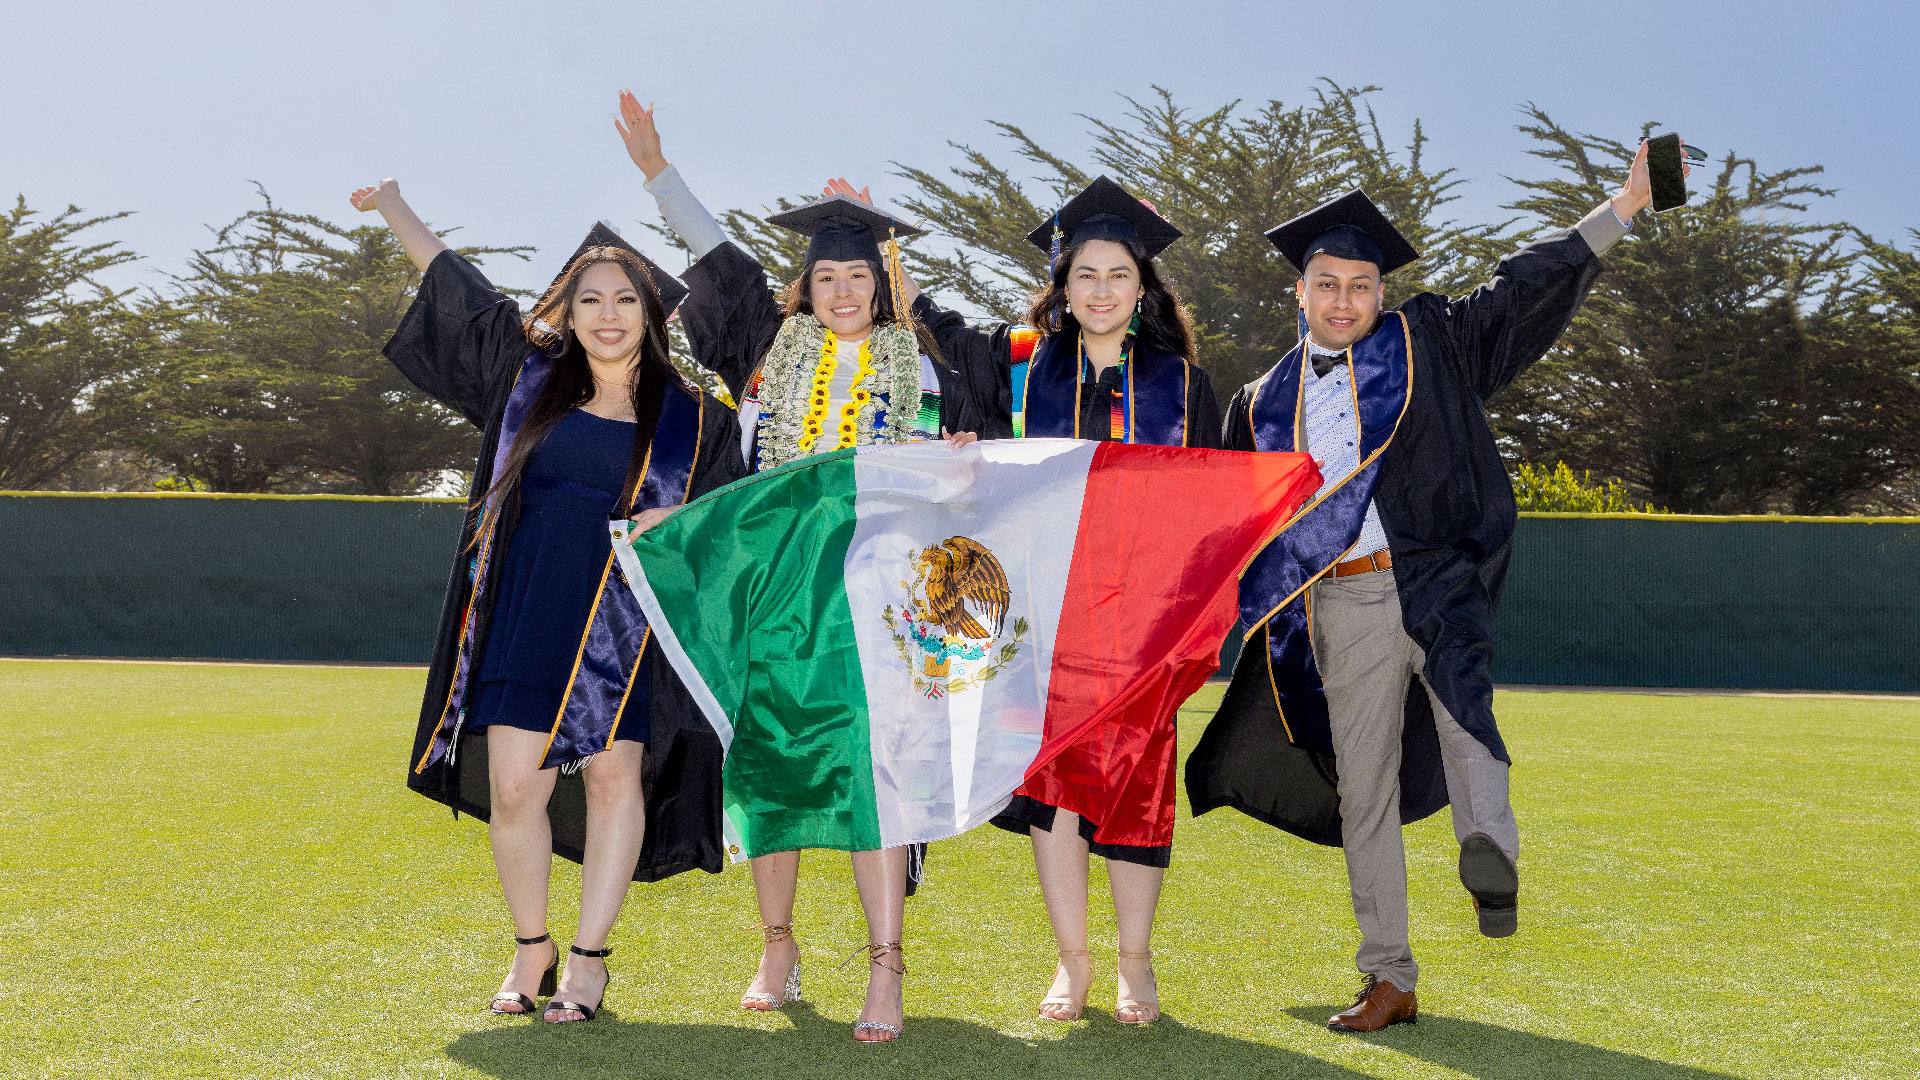 Latinx Grads holding the Mexico flag at the 2022 Commencement | Photo by Brent Dundore-Arias